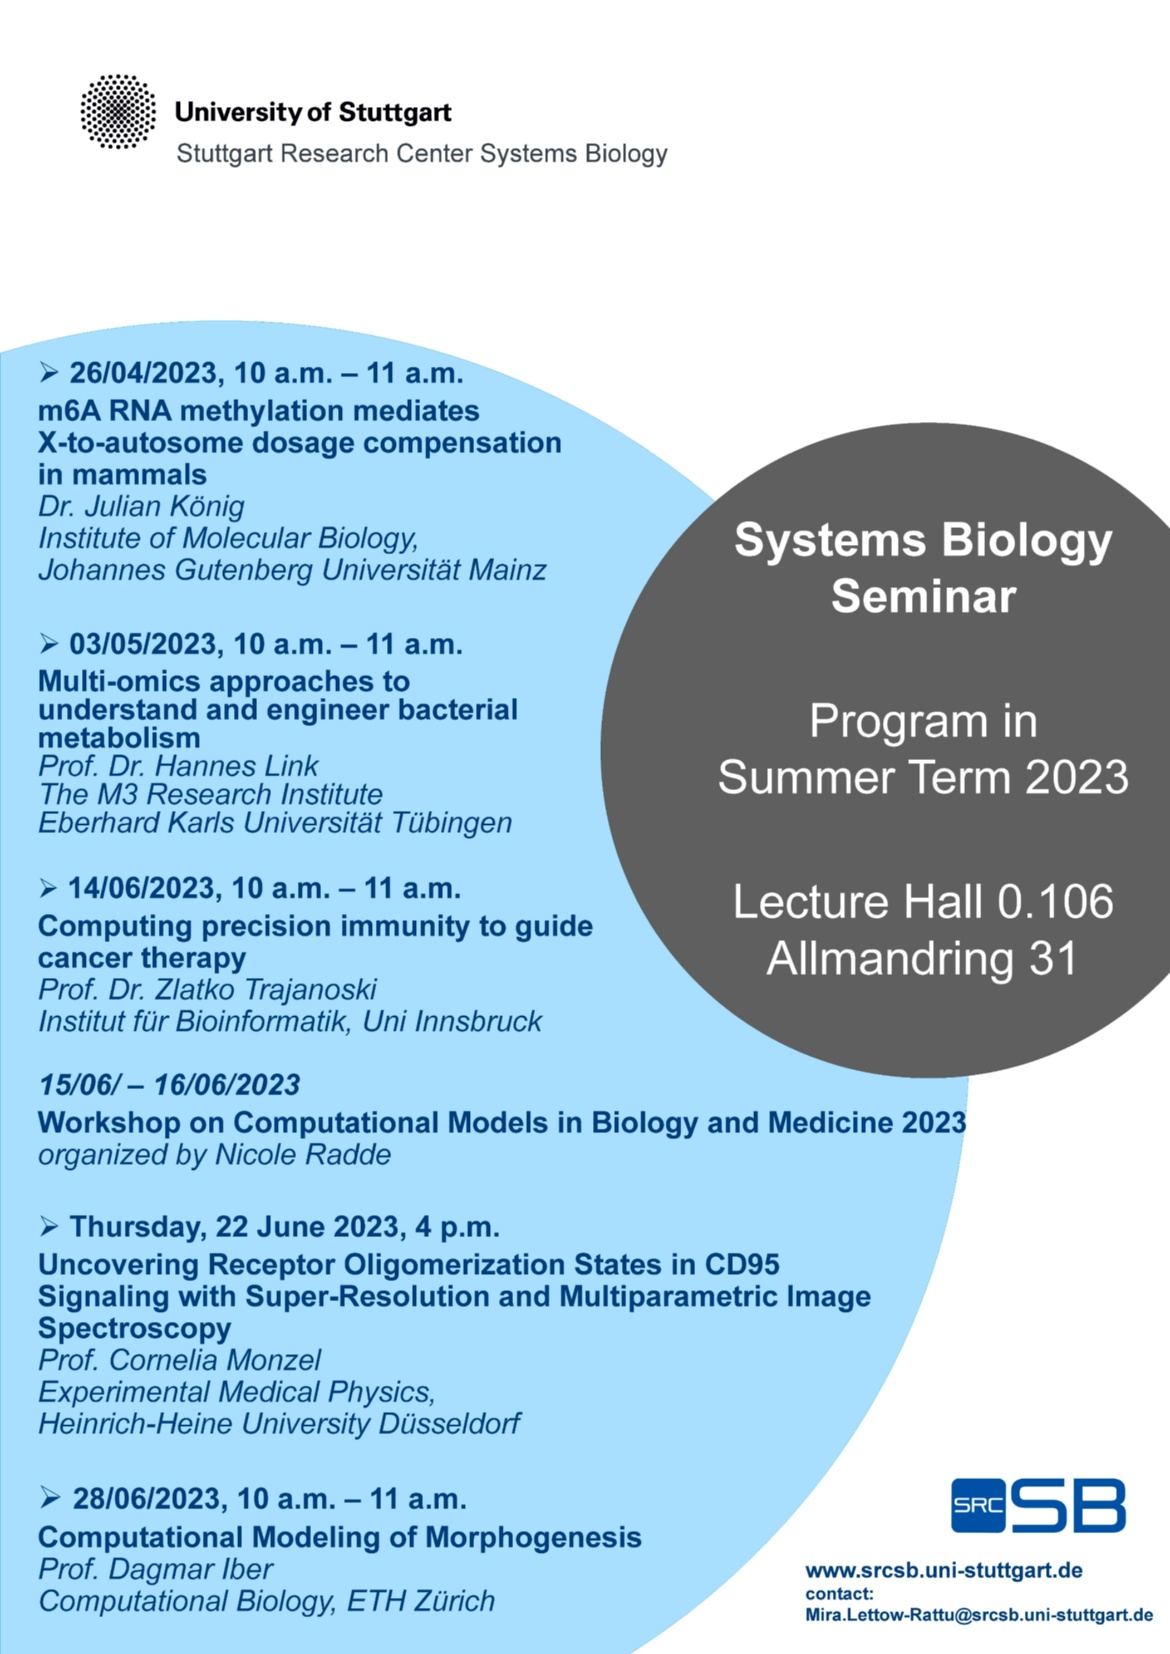 Poster for the Systems Biology Seminar 